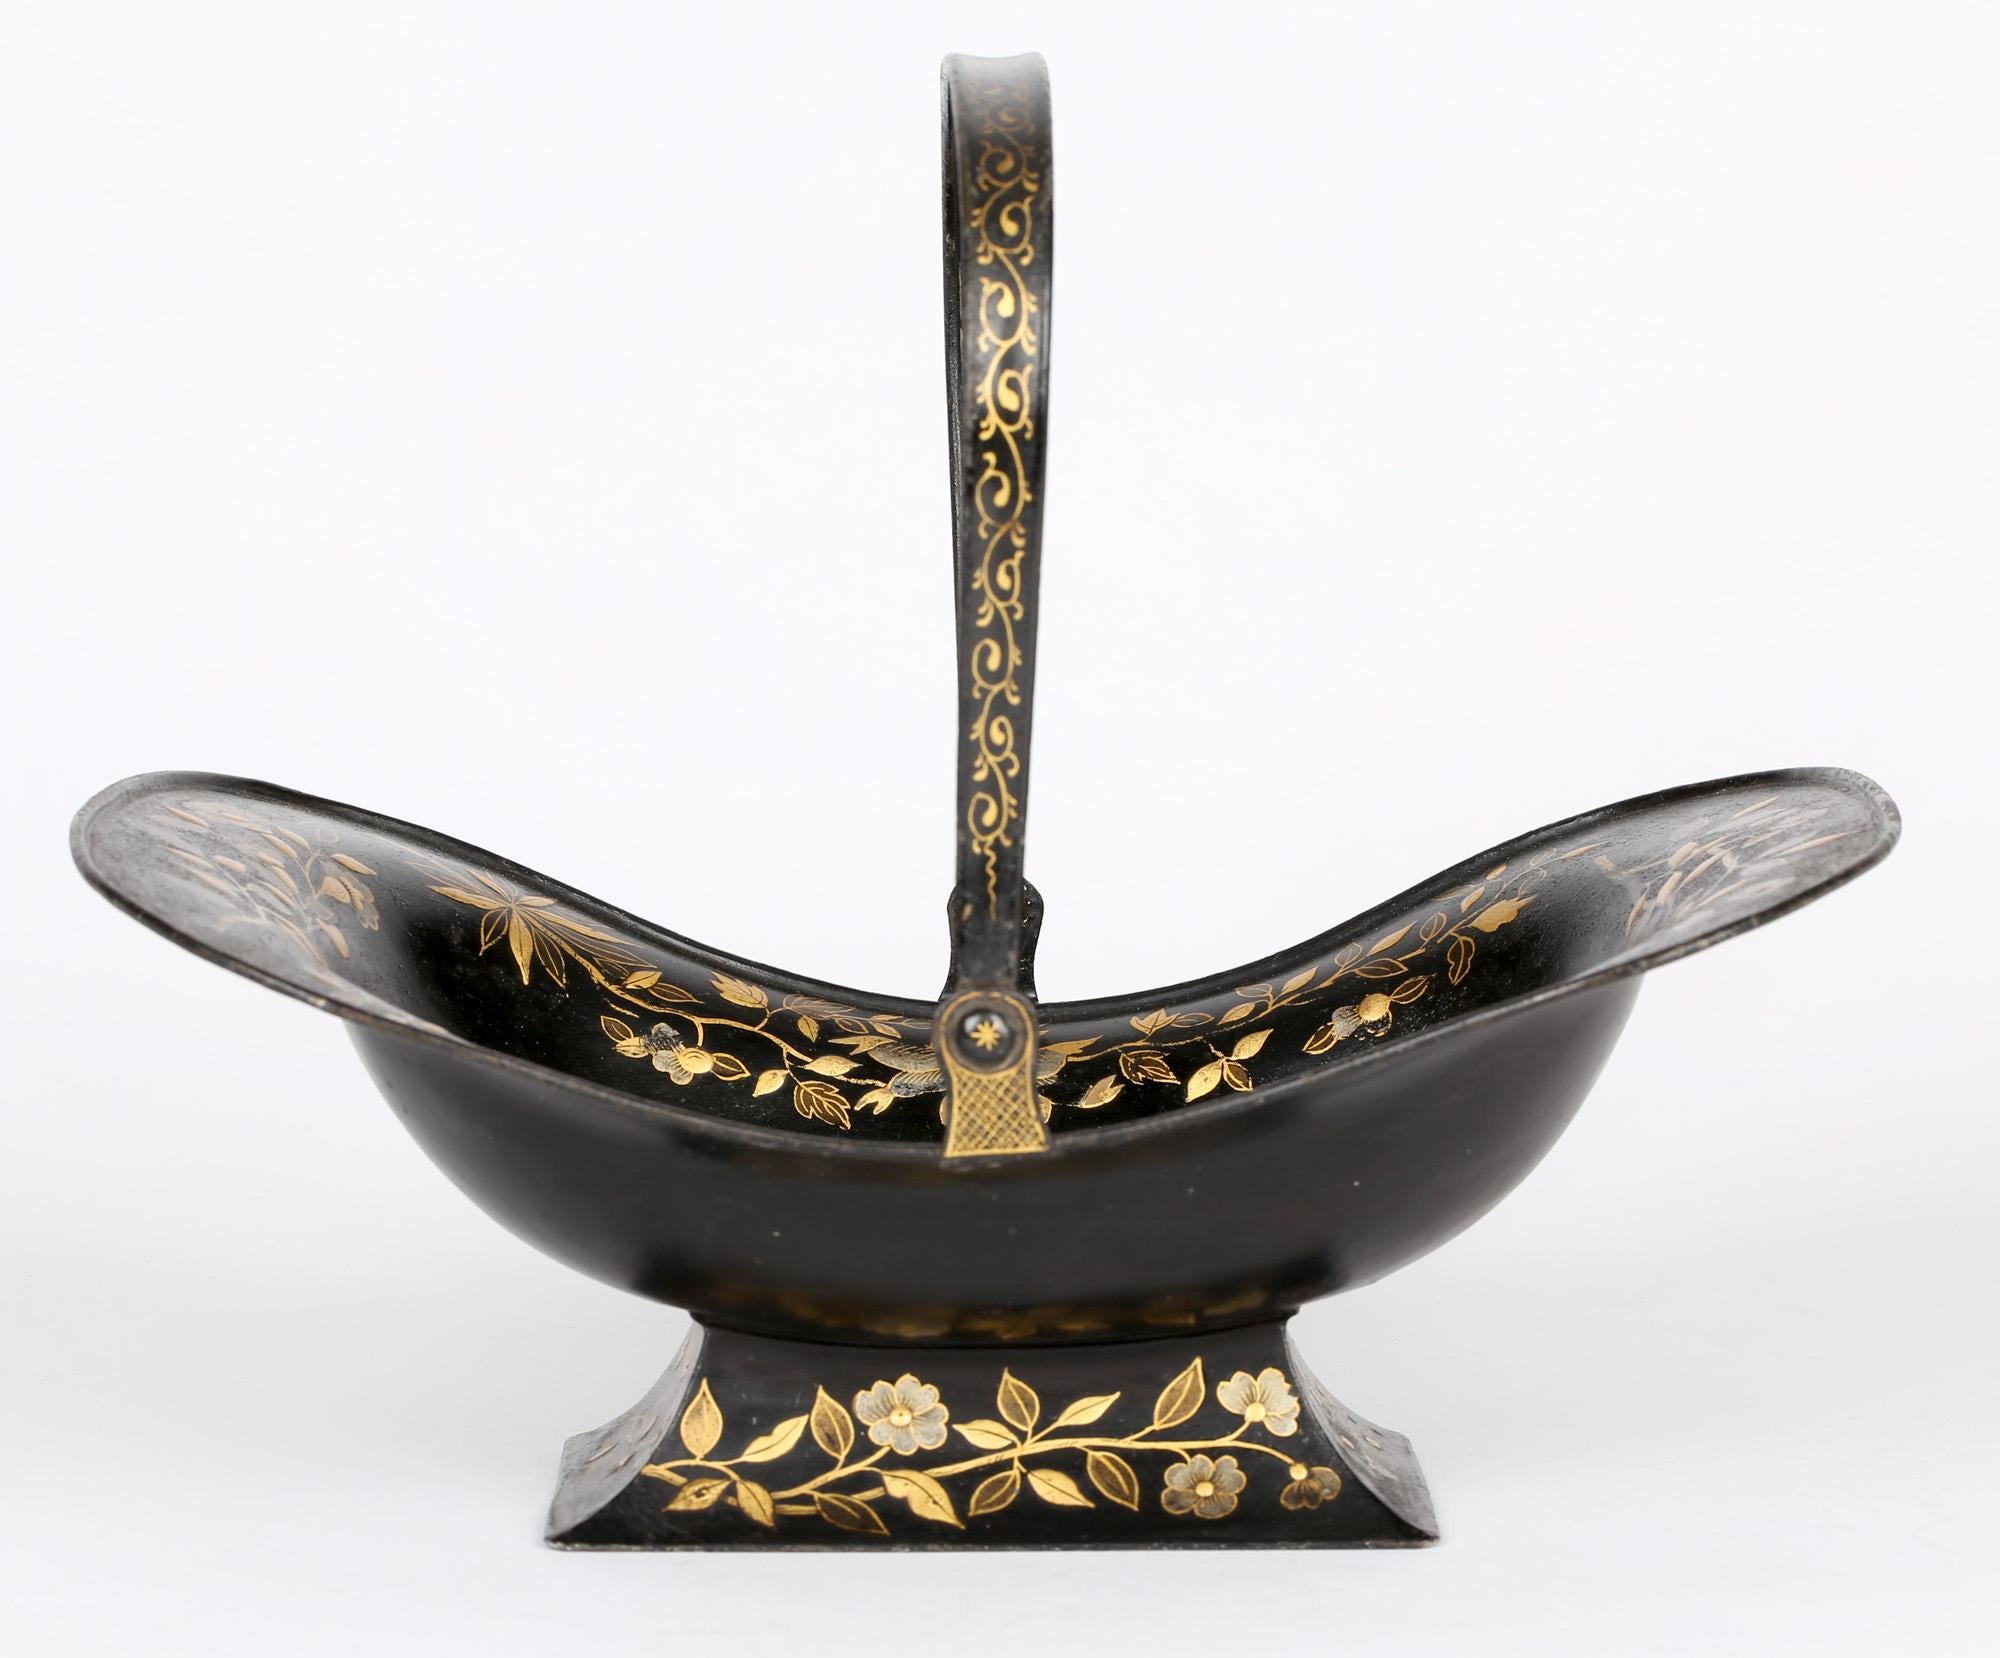 A very fine quality large Georgian toleware black japanned bread basket with floral and a bird design probably Pontypool, Wales and dating from around 1820. The basket stands raised on a rectangular shaped foot, the curved rectangular shaped basket